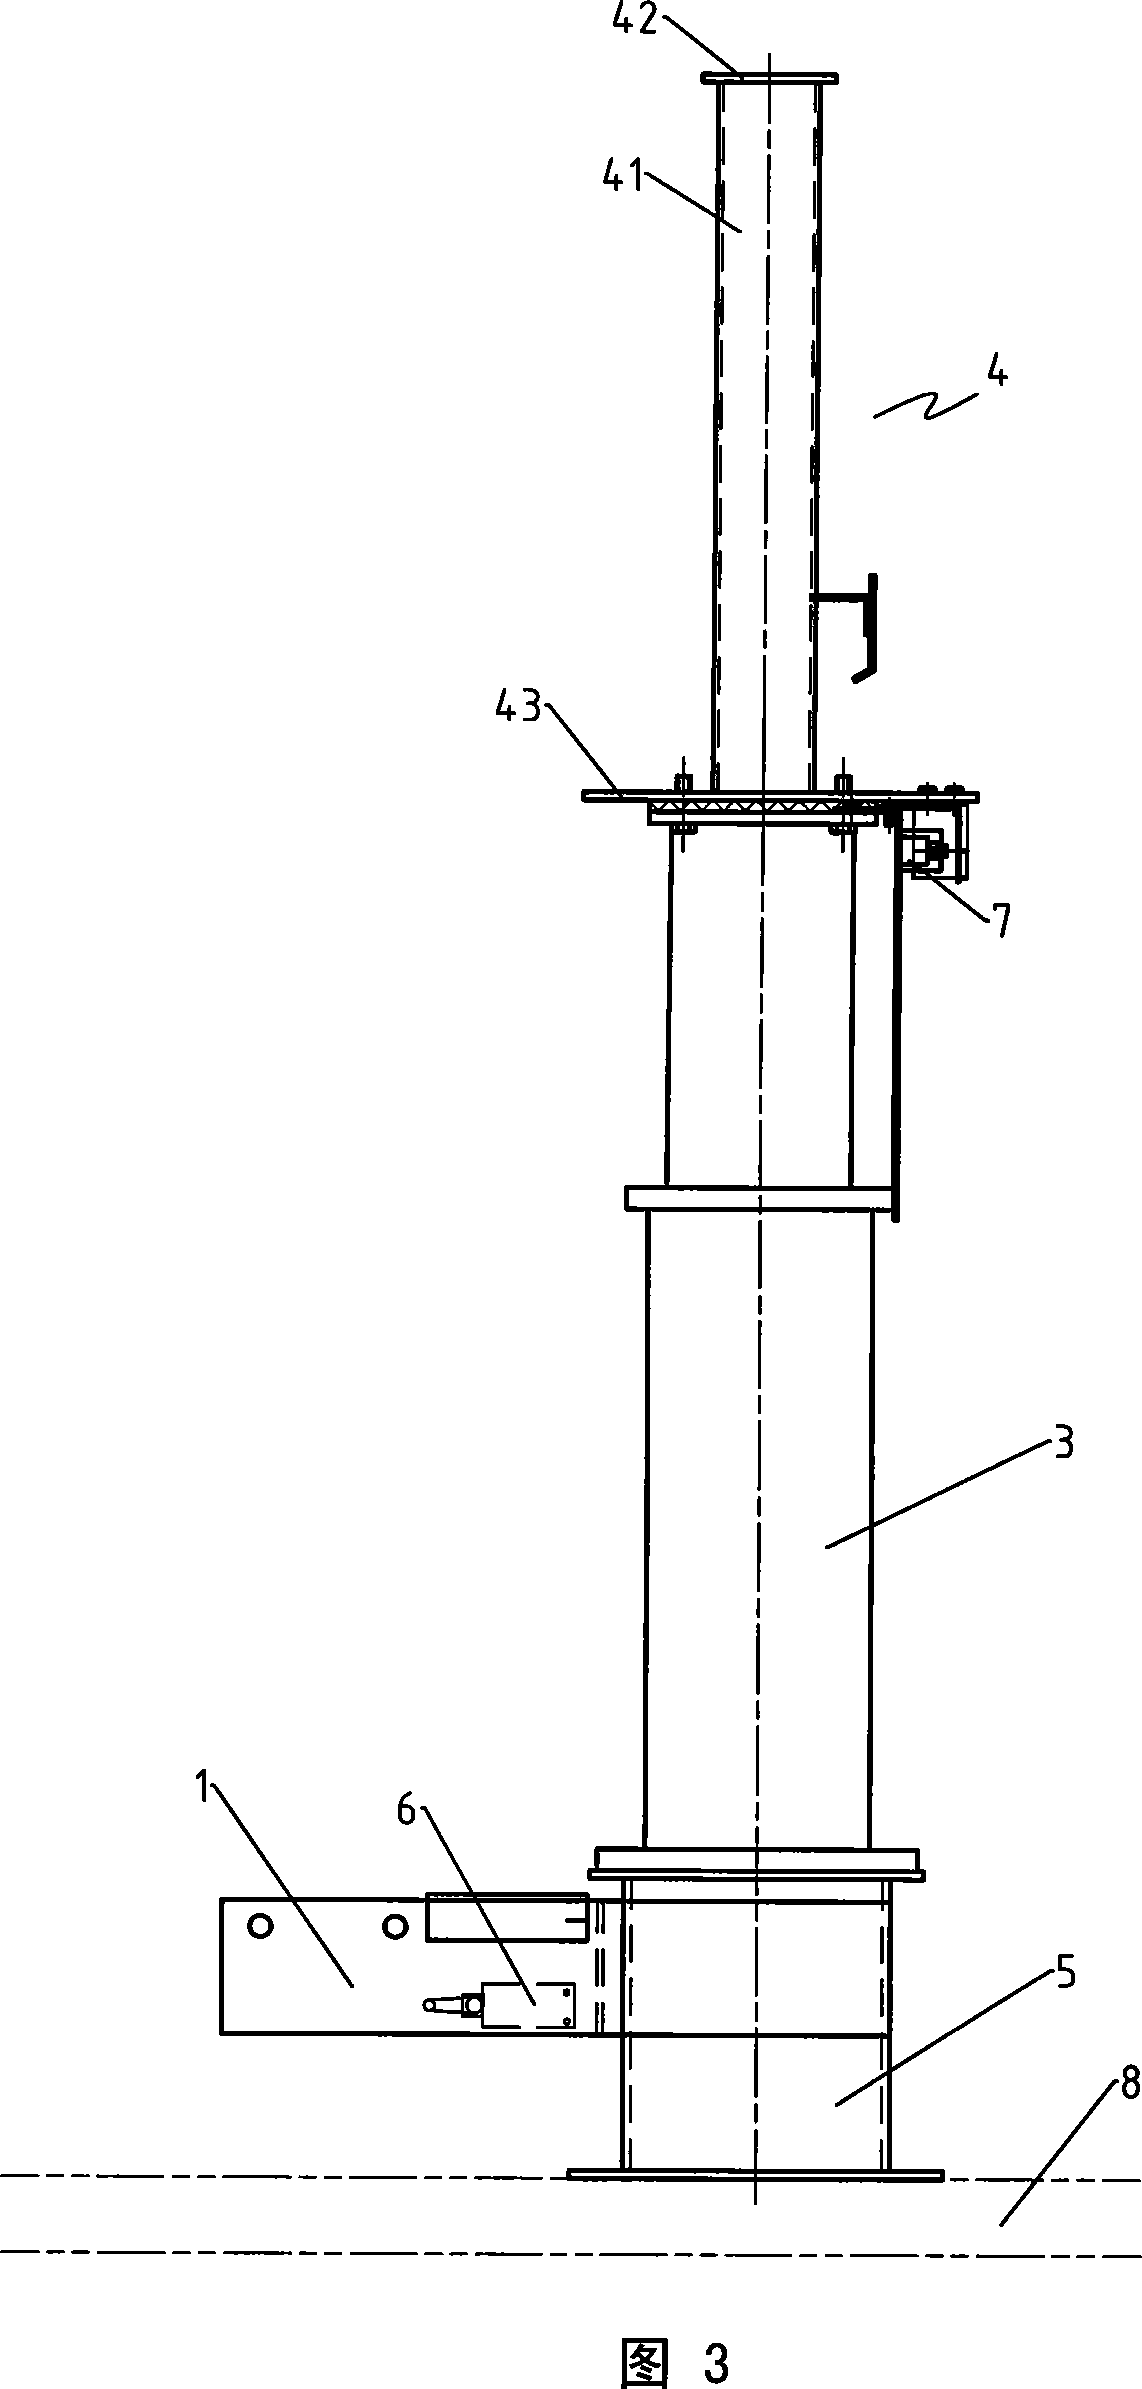 Method for increasing elvator pit examination and repair safety space and elvator pit maintain check protection system